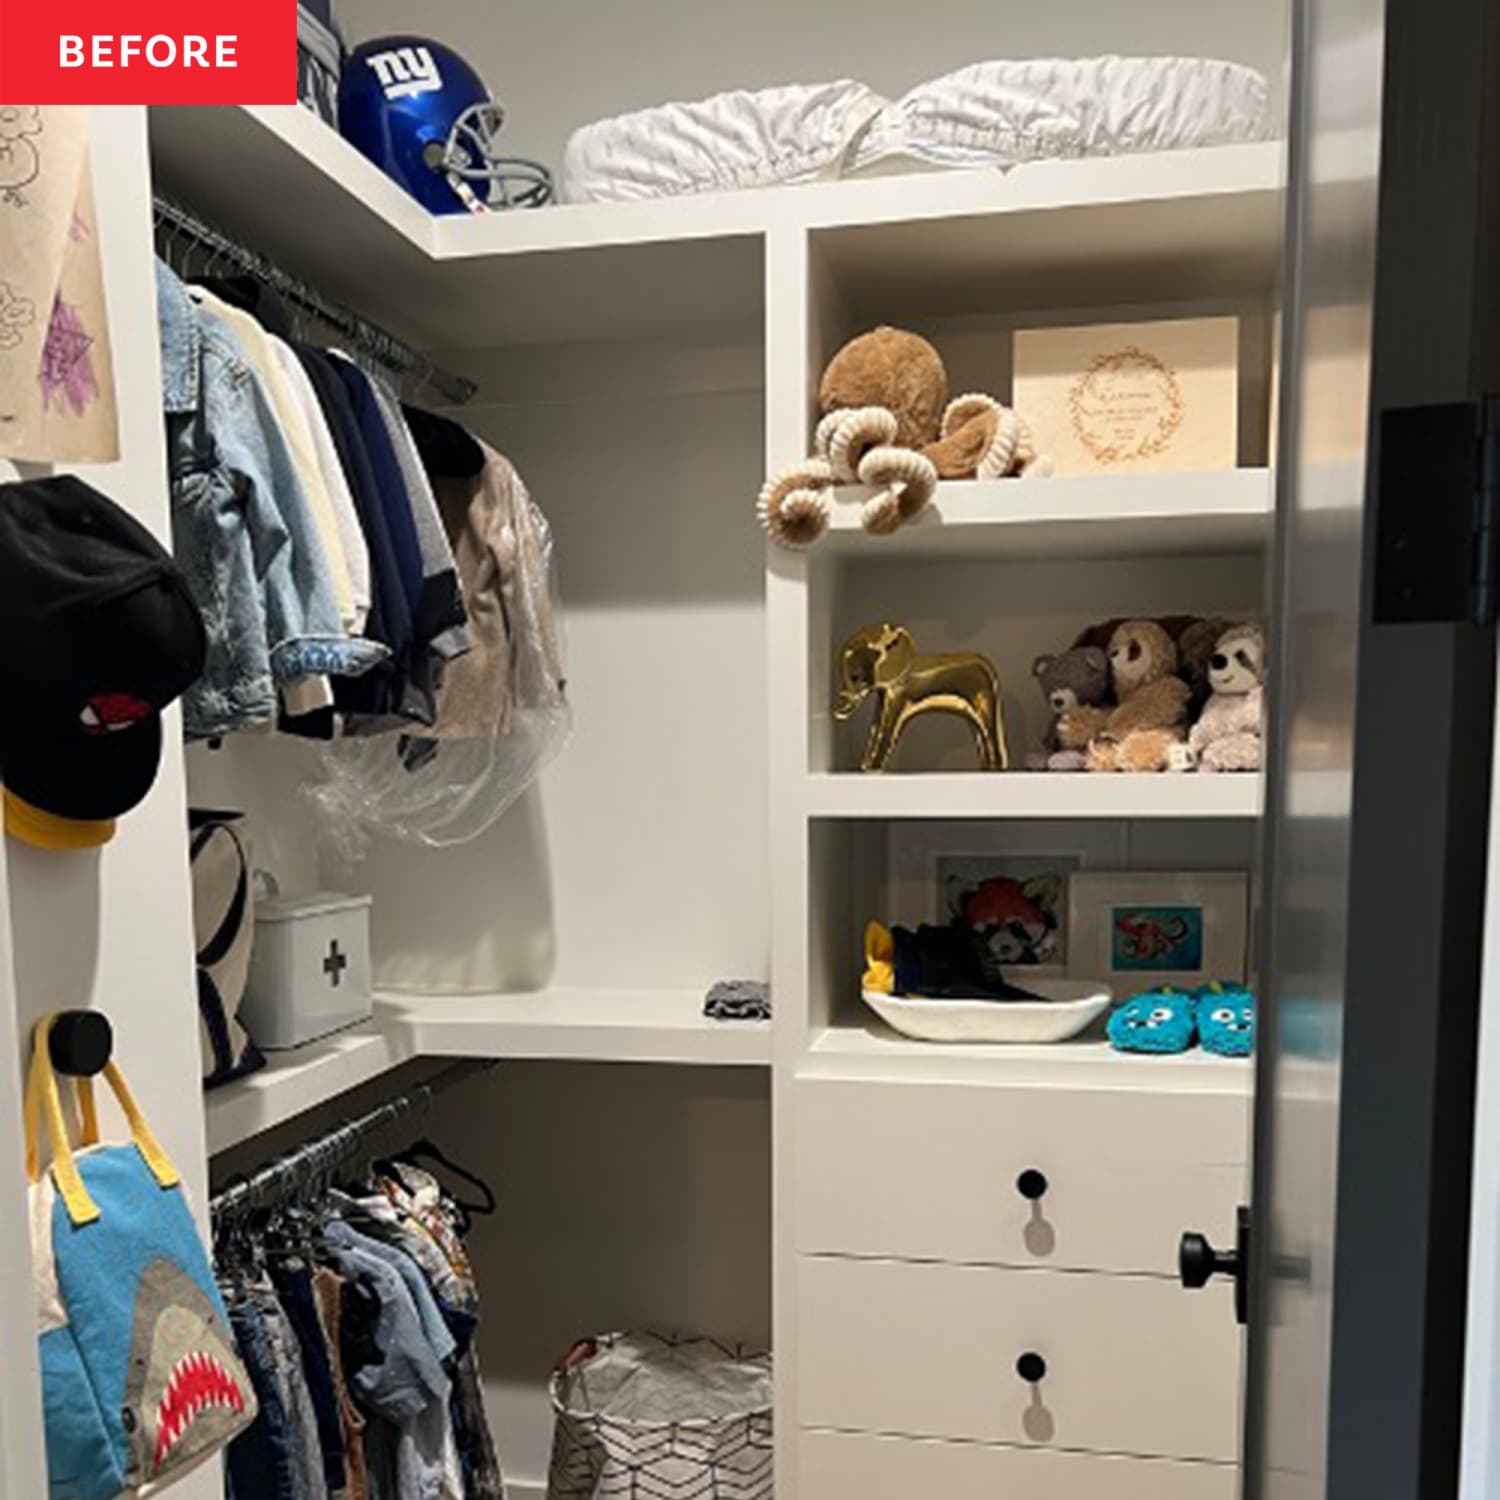 https://cdn.apartmenttherapy.info/image/upload/f_jpg,q_auto:eco,c_fill,g_auto,w_1500,ar_1:1/at%2Forganize-clean%2Fbefore-after%2FTeresa_Dinneen_Kids_Closets%2FTeresaDinneen_111372792_image004